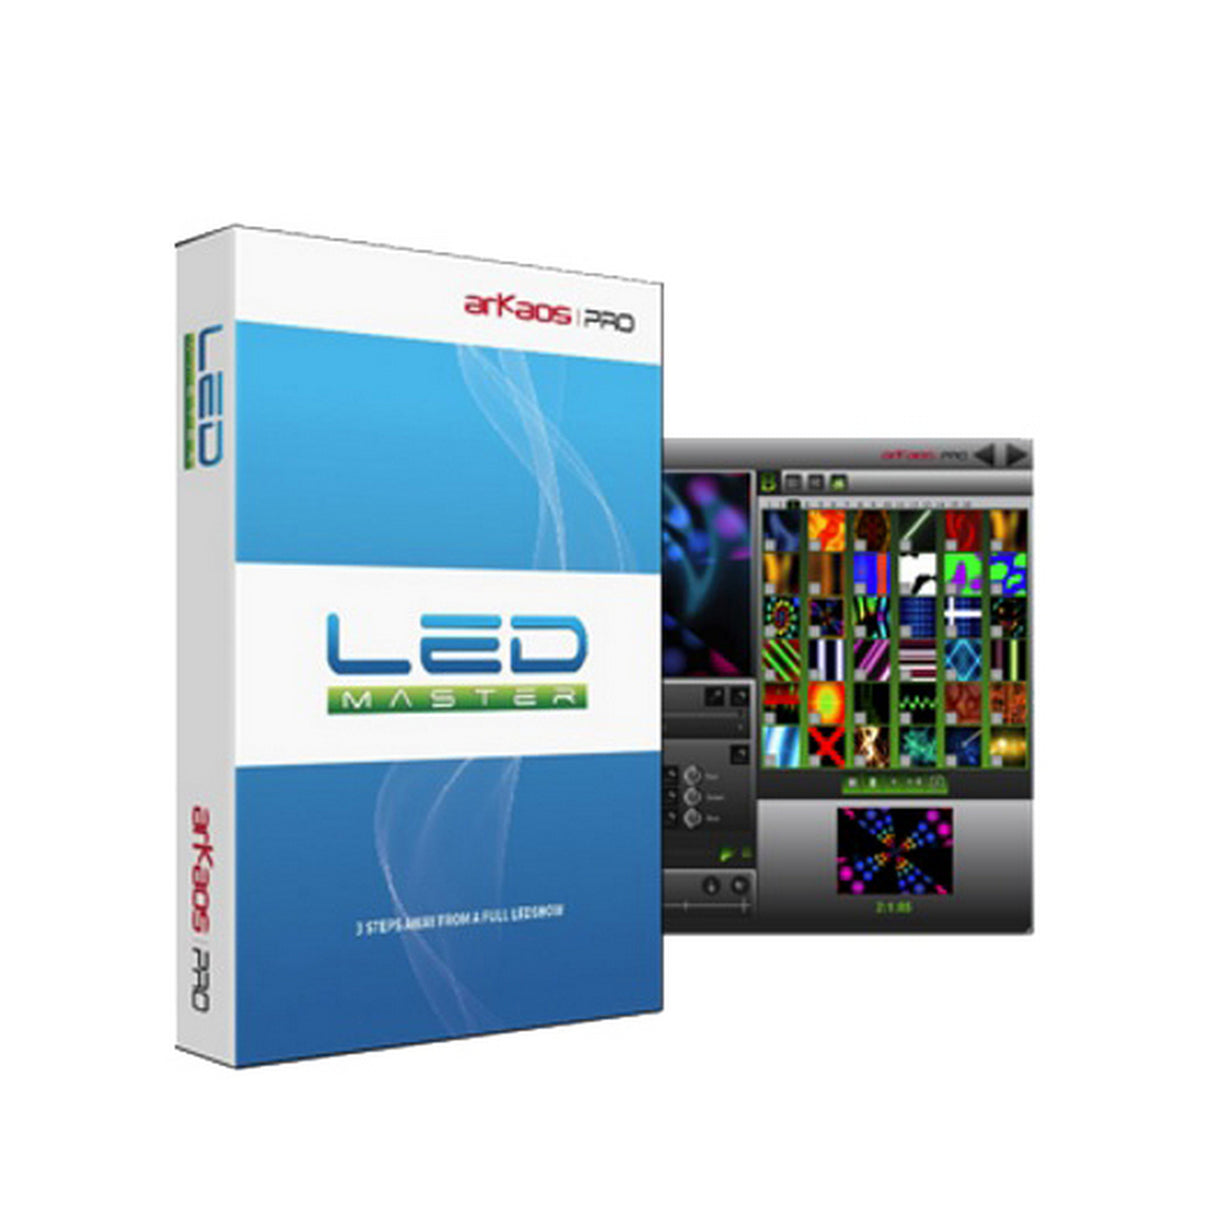 Blizzard Lighting Arkaos LED Master | Pixel Mapping Software for Kling Net Fixtures Physical Copy